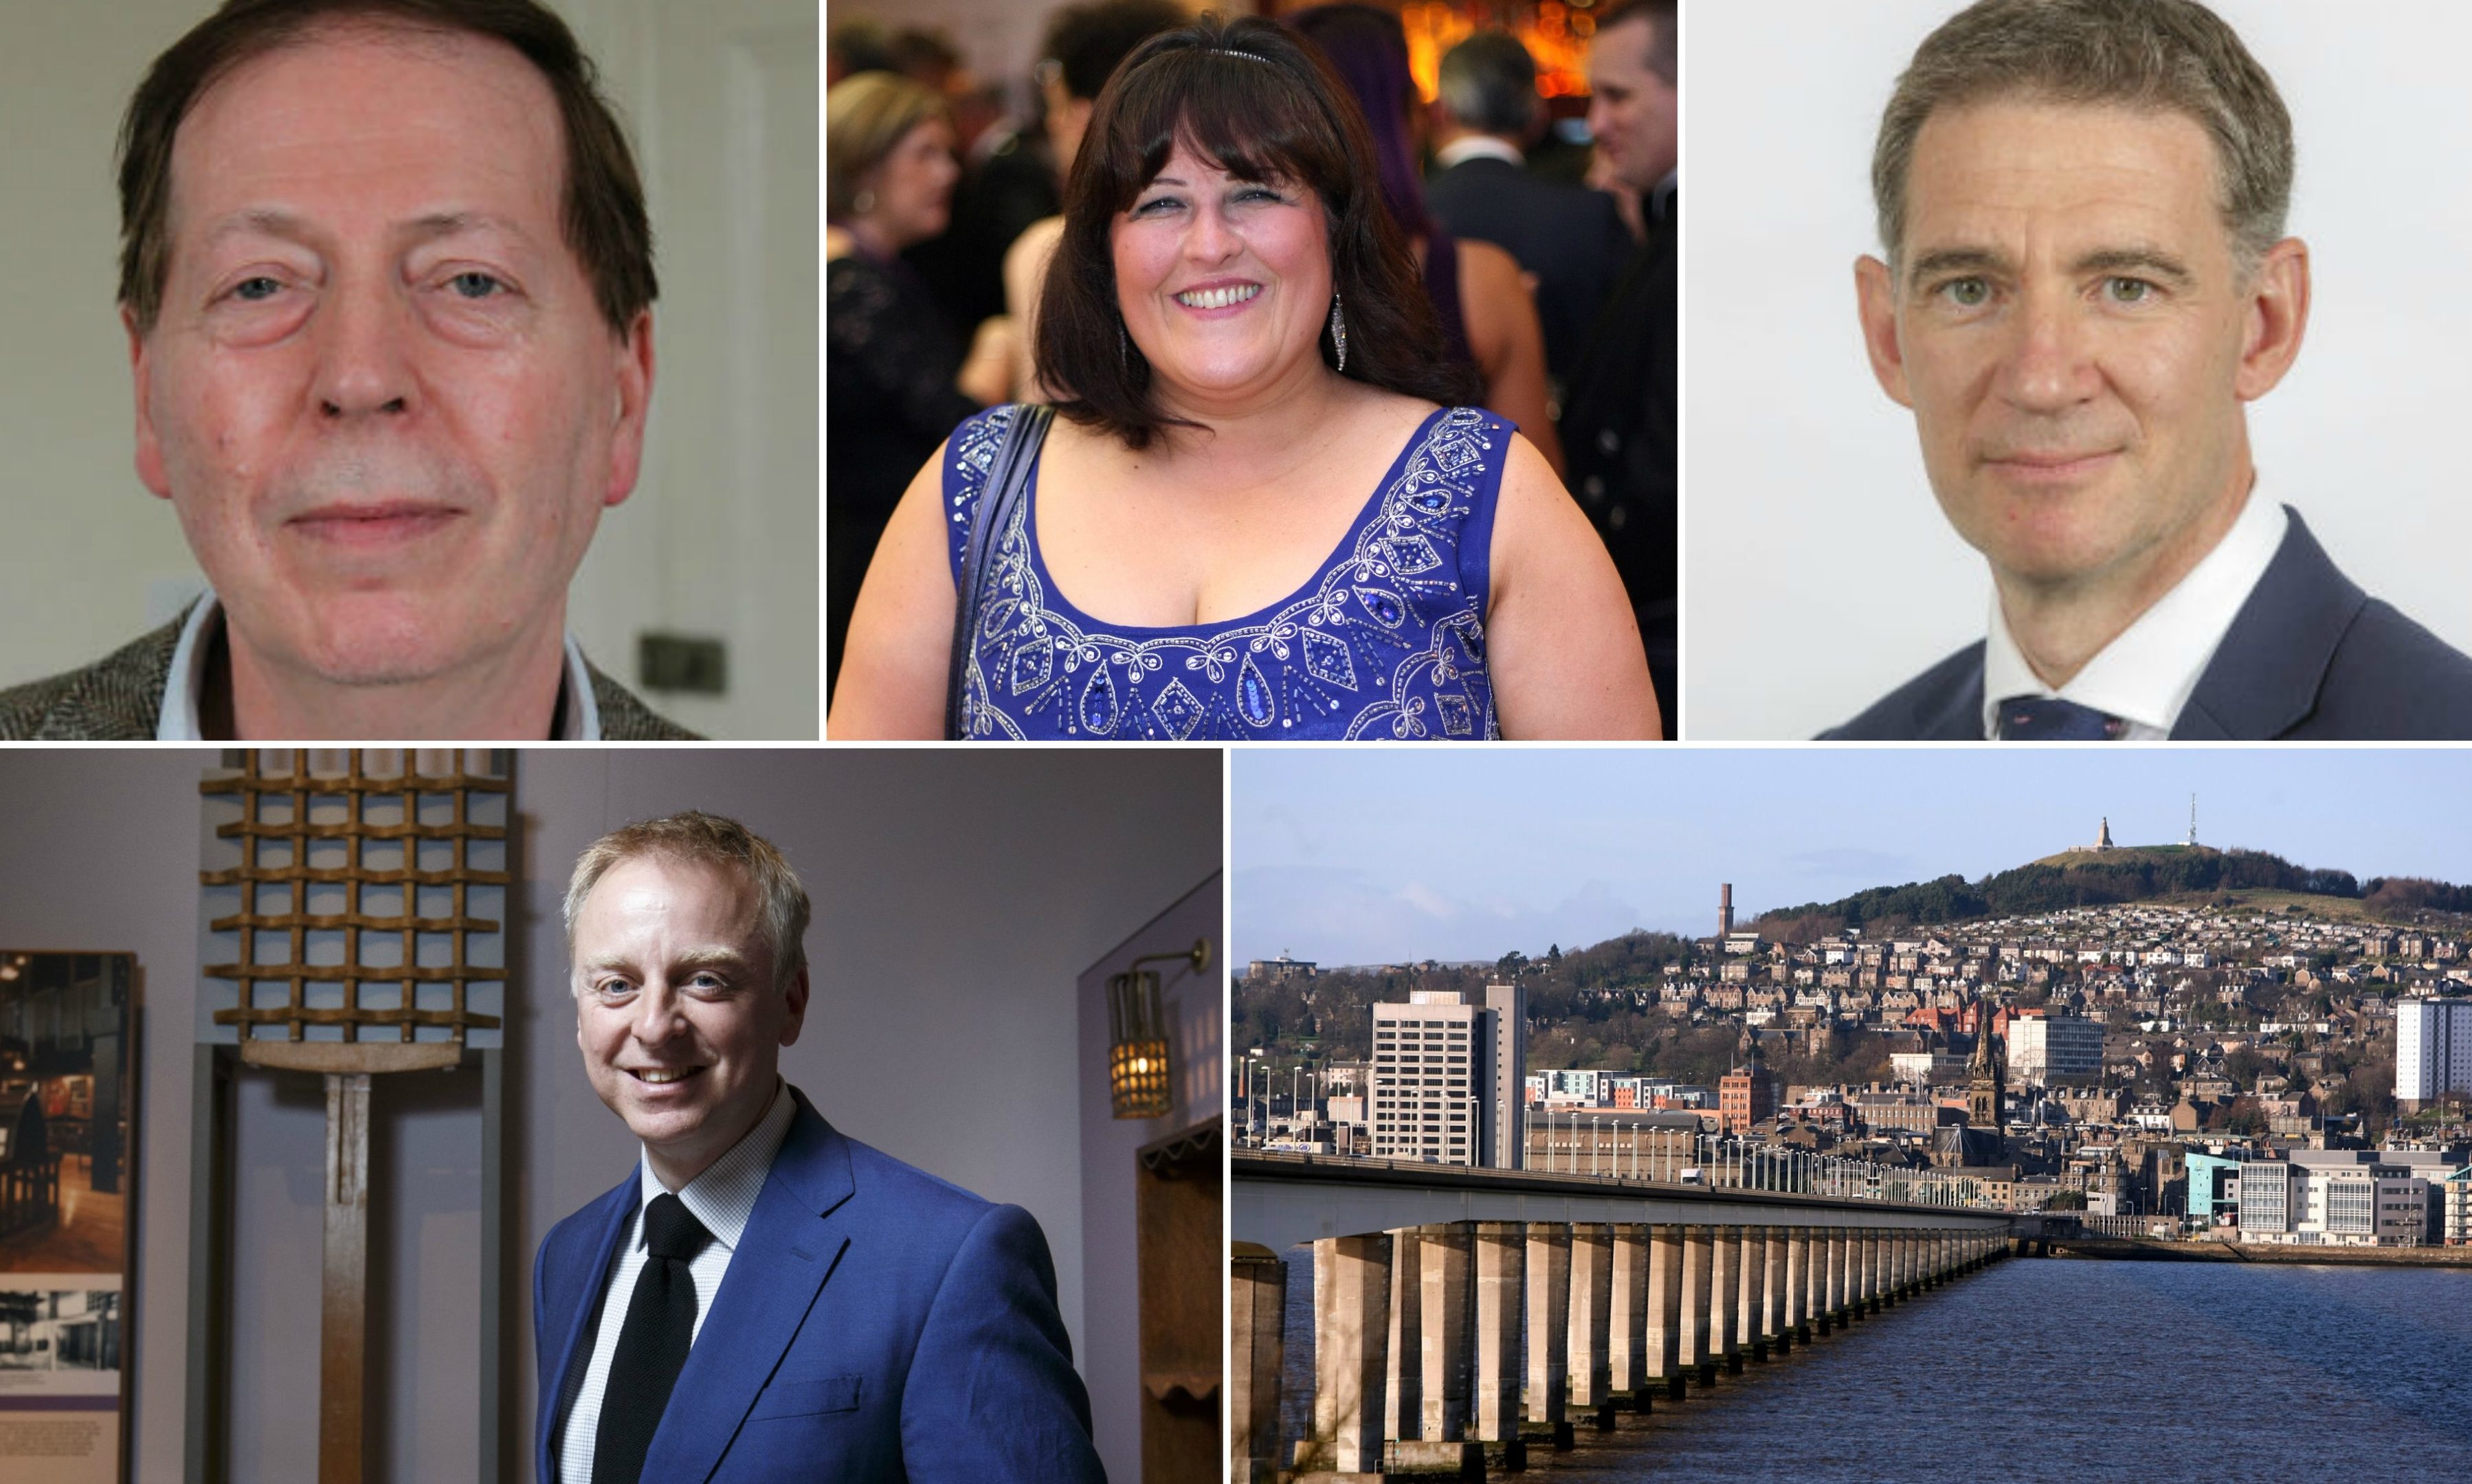 The Courier Business Briefings return in January 2018, with a panel including Philip Long, Professor Gavin Reid, Mark Bevan and Lynne Short.